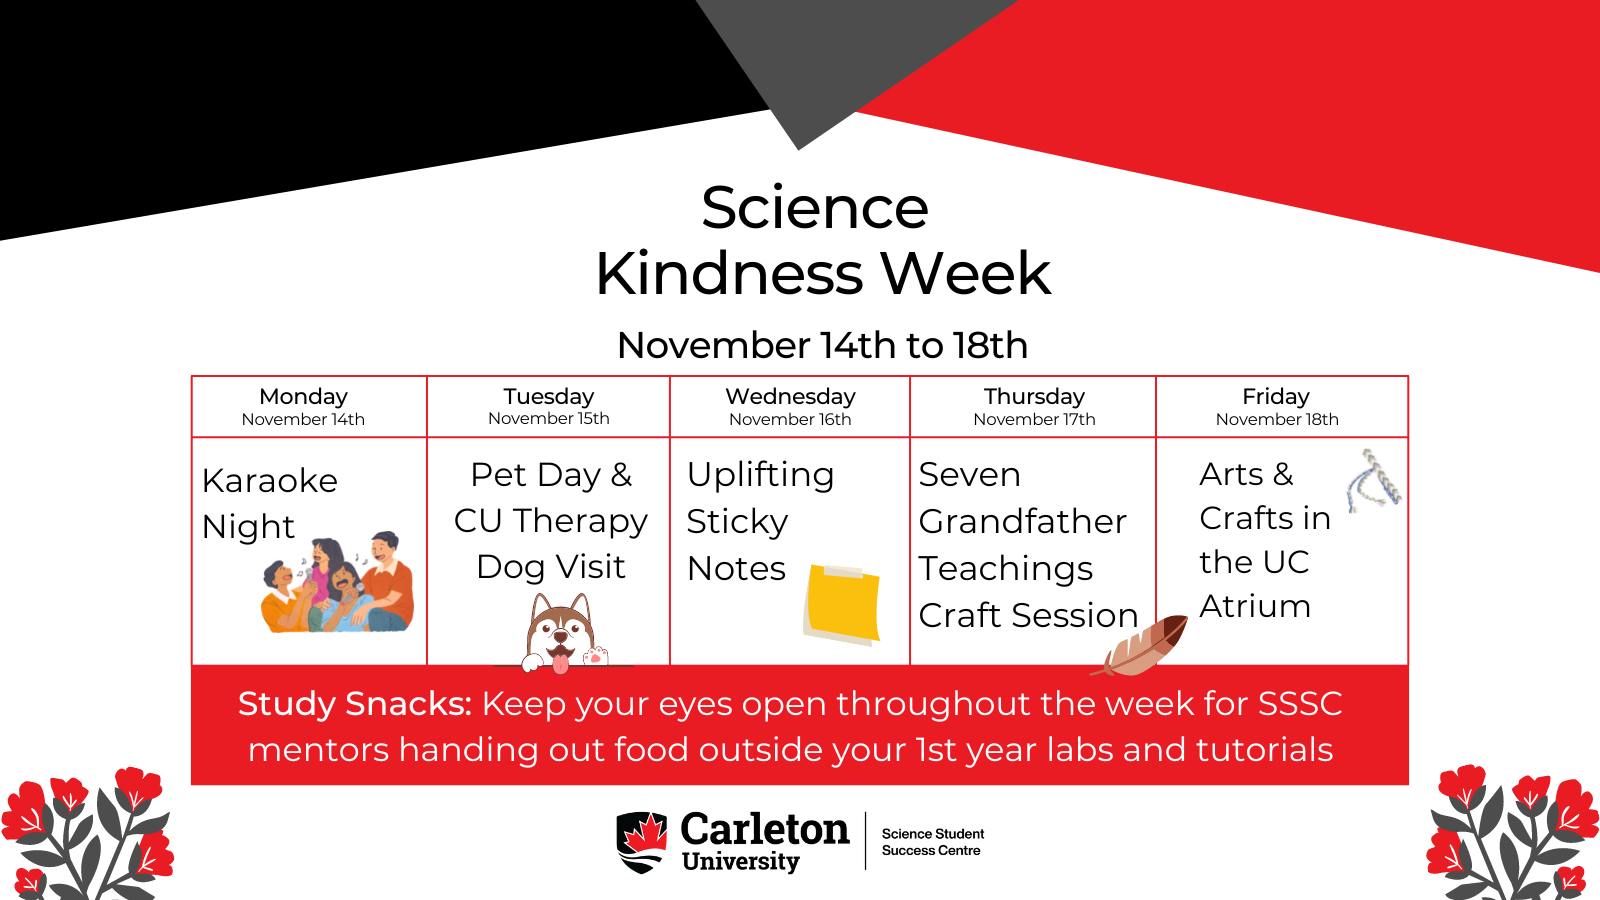 Poster for Science Kindness Week. The poster text reads “Science Kindness Week, November 14th to 18th. Monday, November 14th, Karaoke Night. Tuesday, November 15th, Pet Day & CU Therapy Dog Visit. Wednesday, November 16th, Uplifting Sticky Notes. Thursday, November 17th, Seven Grandfather Teachings Craft Session. Friday, November 18th, Arts & Crafts in the UC Atrium. Study Snacks: Keep your eyes open throughout the week for SSSC mentors handing out food outside your 1st year labs and tutorials. Carleton University, Science Student Success Centre. 